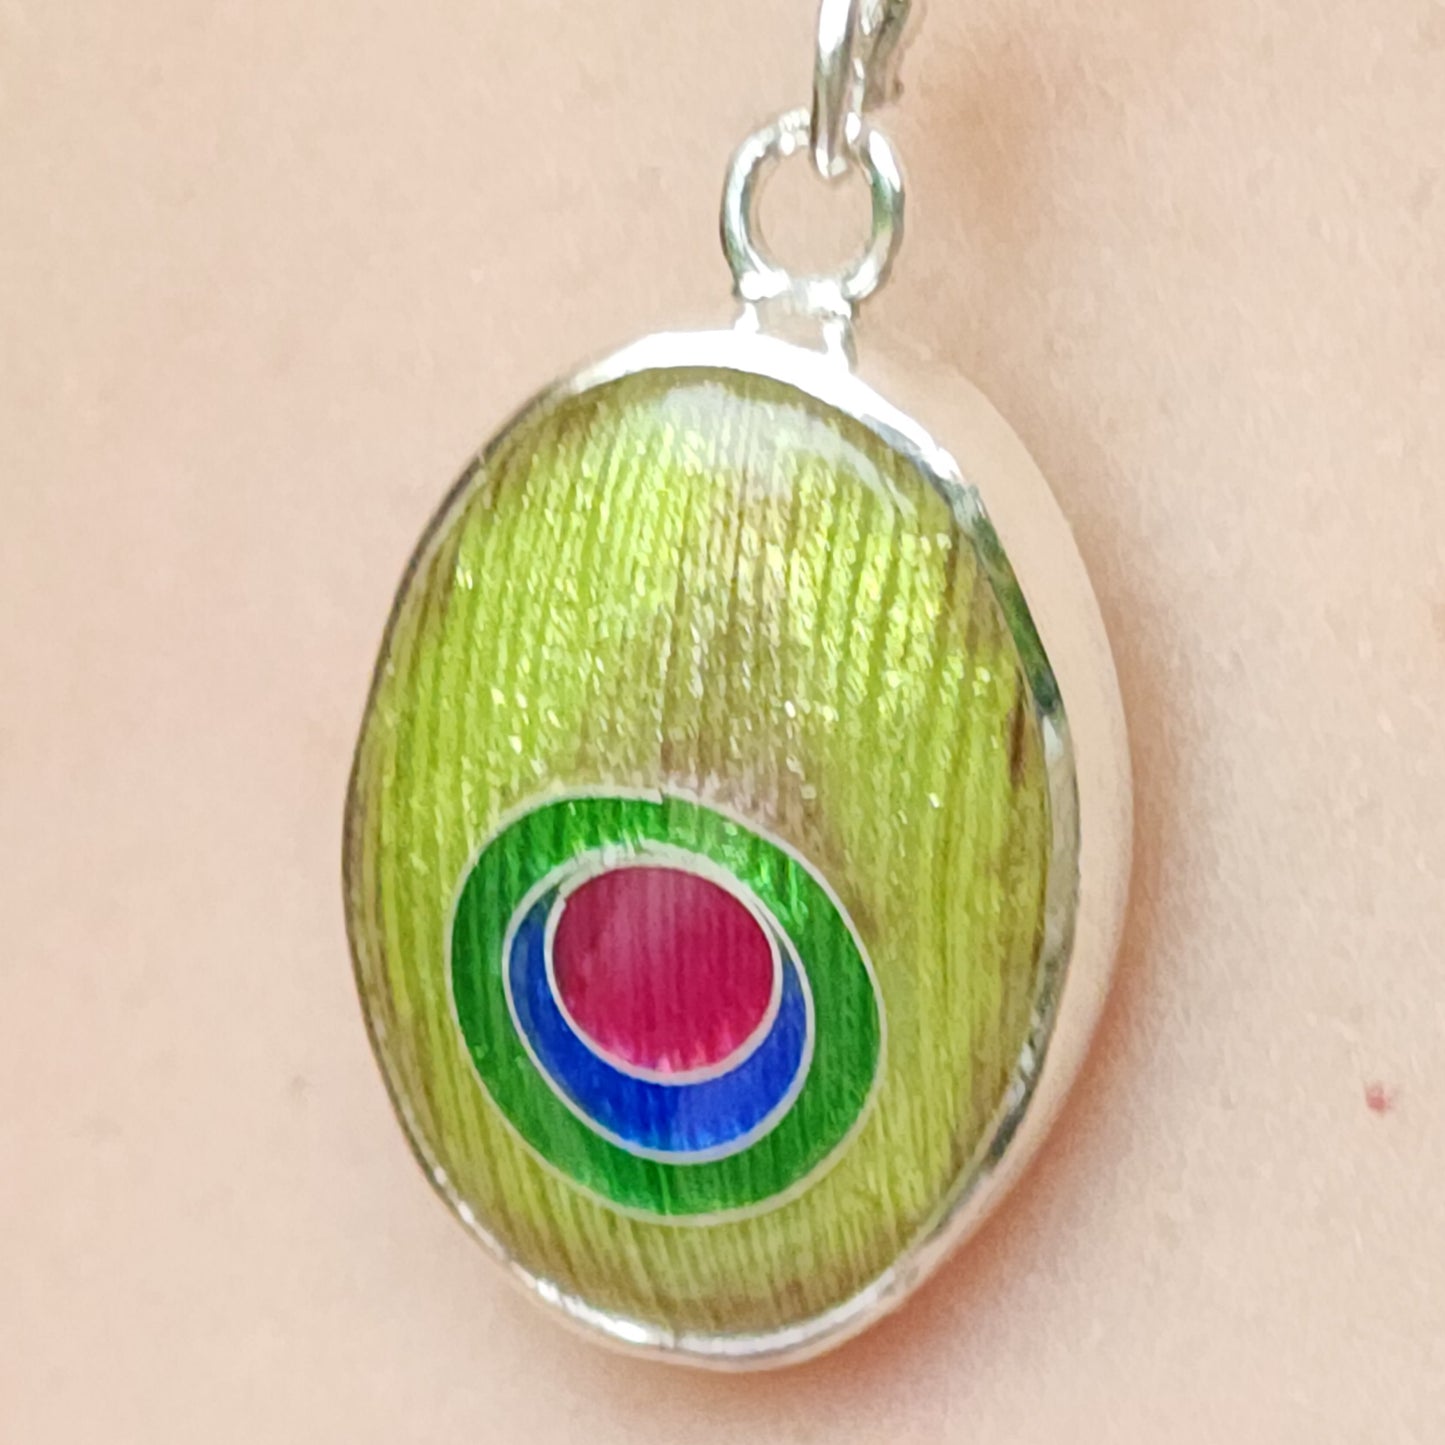 Peacock Pendant - Cloisonne and Champleve Enamels on a Fine Silver (999), Handmade in Australia